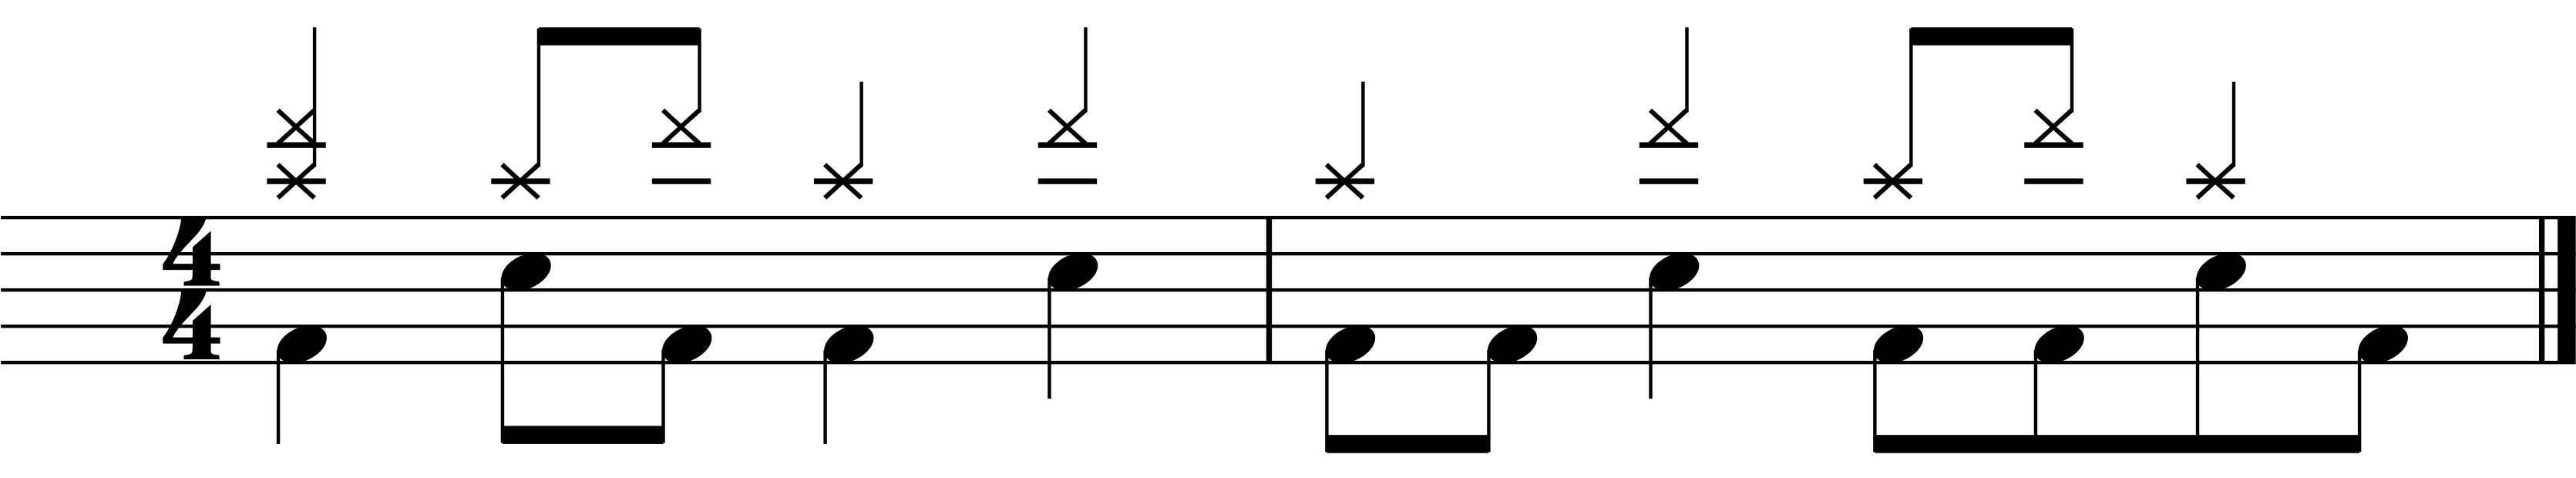 A free groove lesson combining straight rhythms and a bosa nova